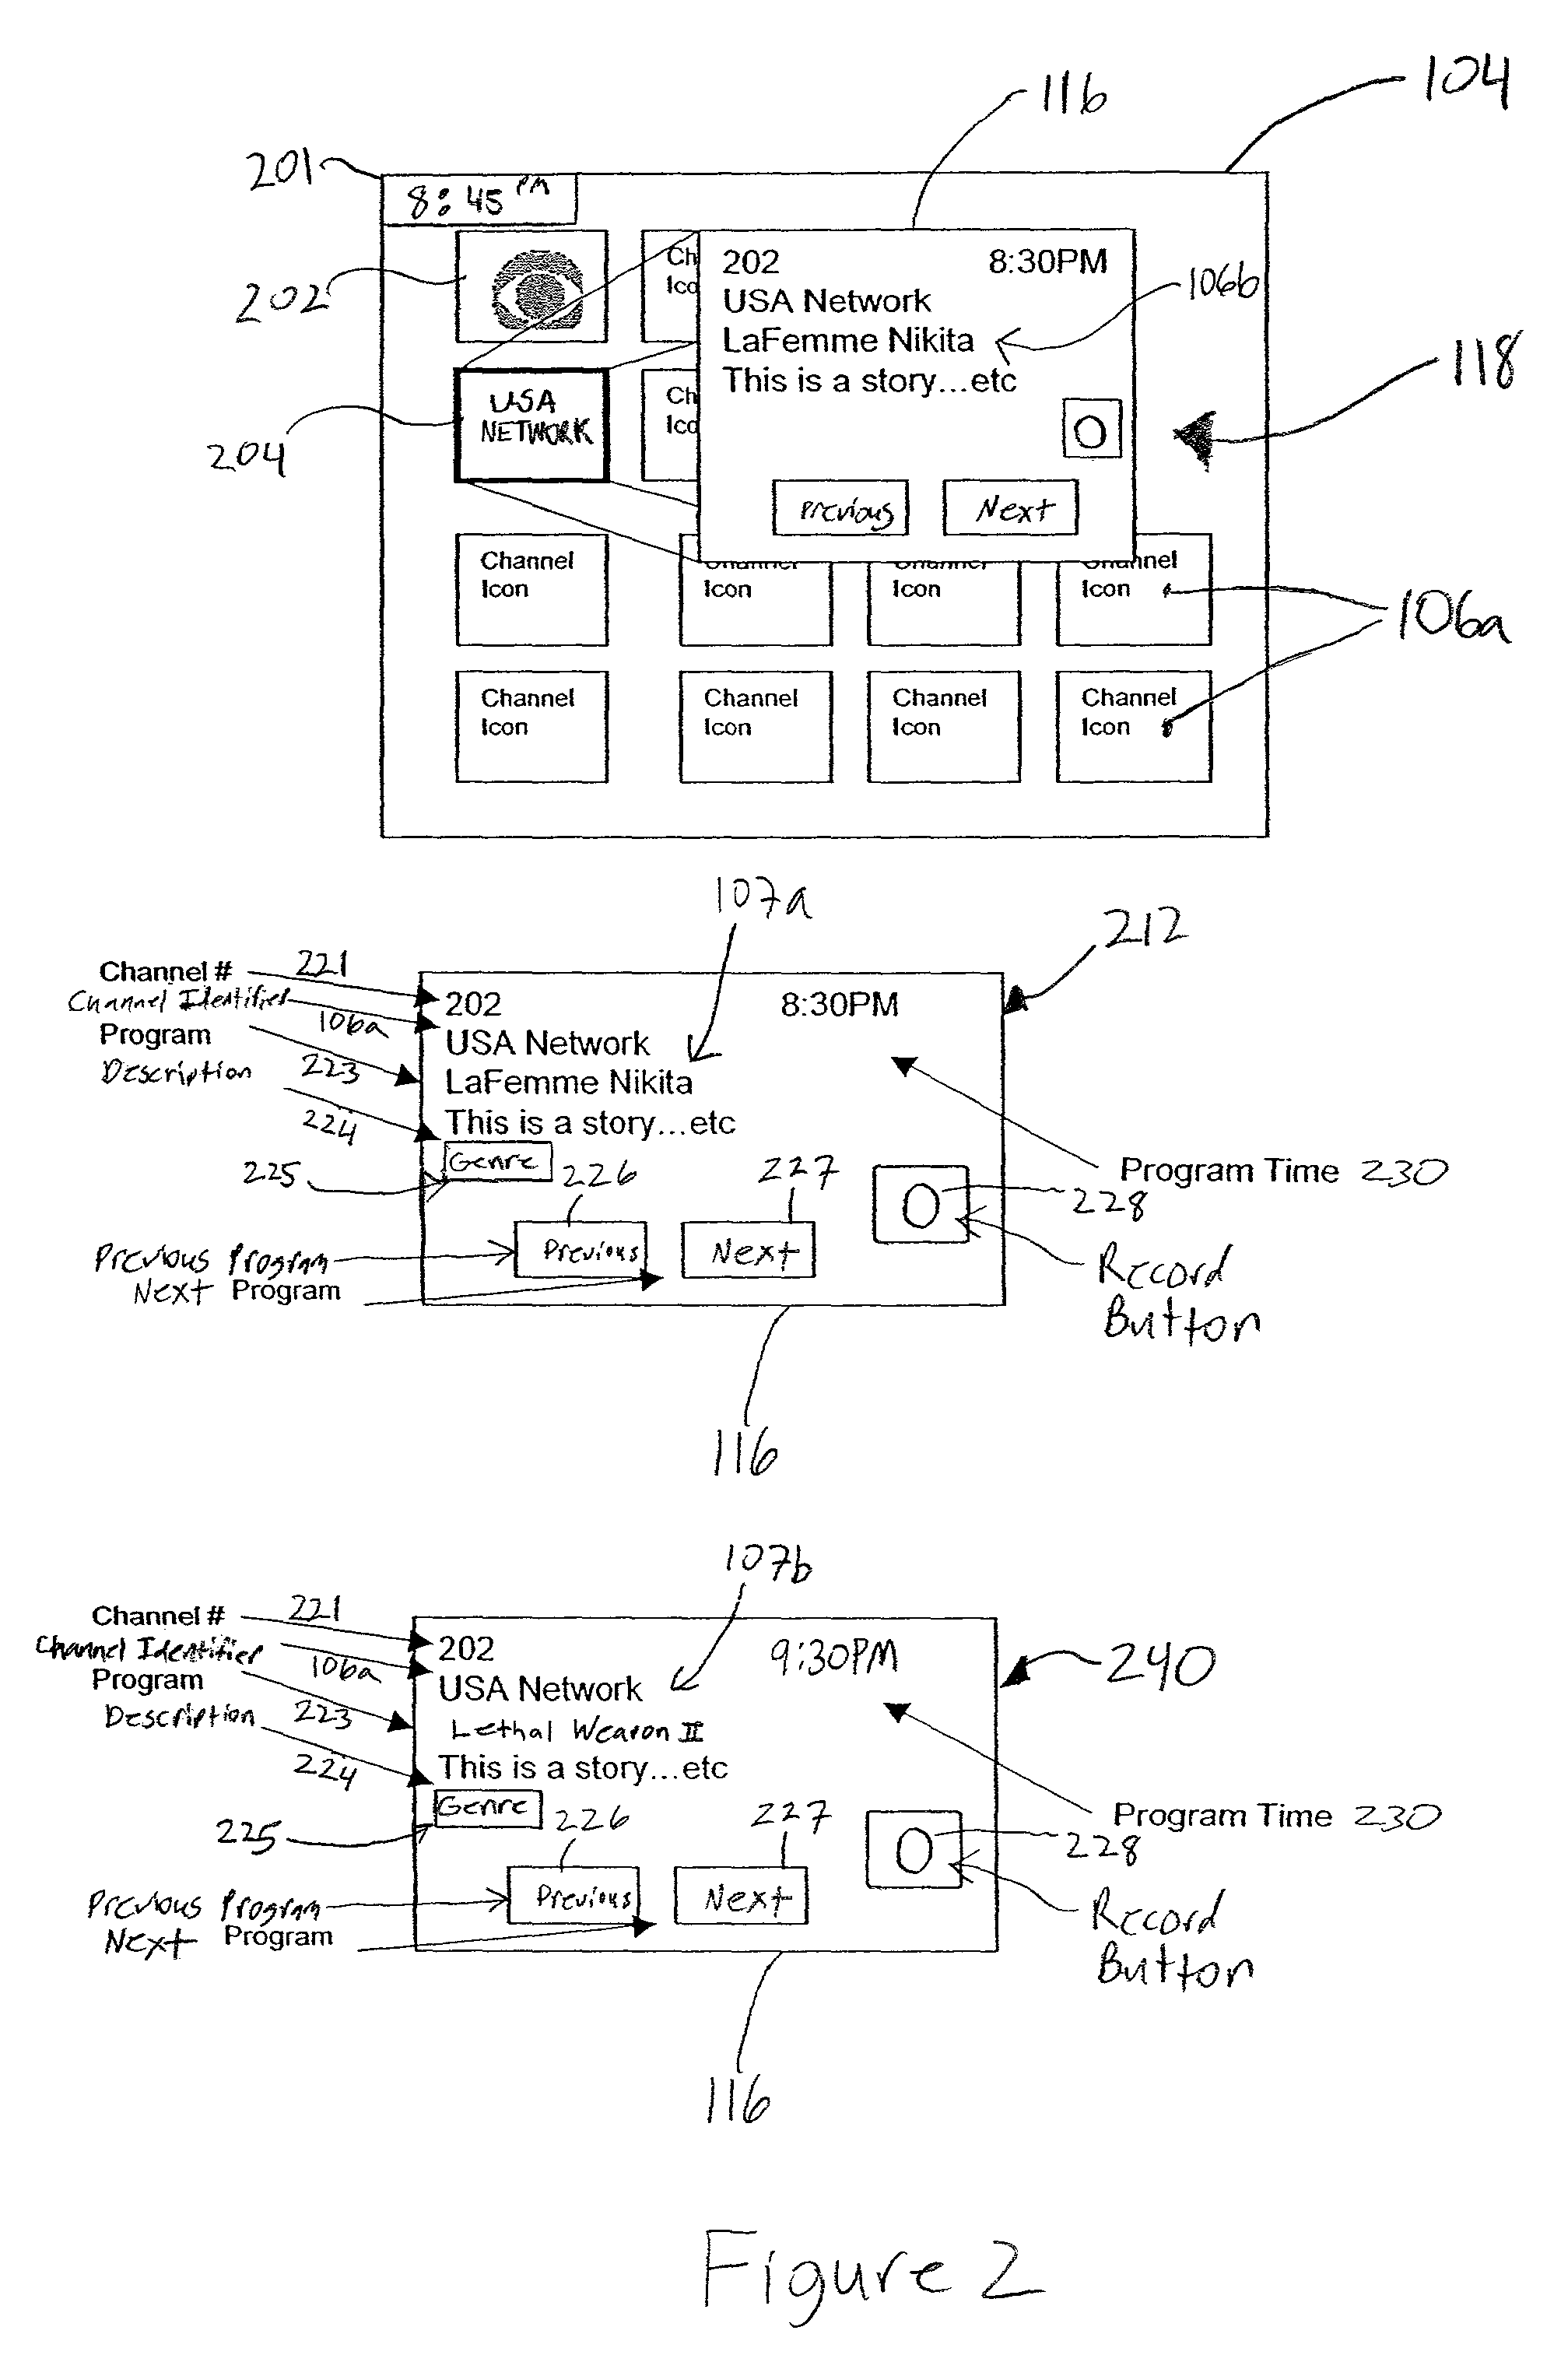 Client terminal for displaying program guide information associated with different programs within a pop-up